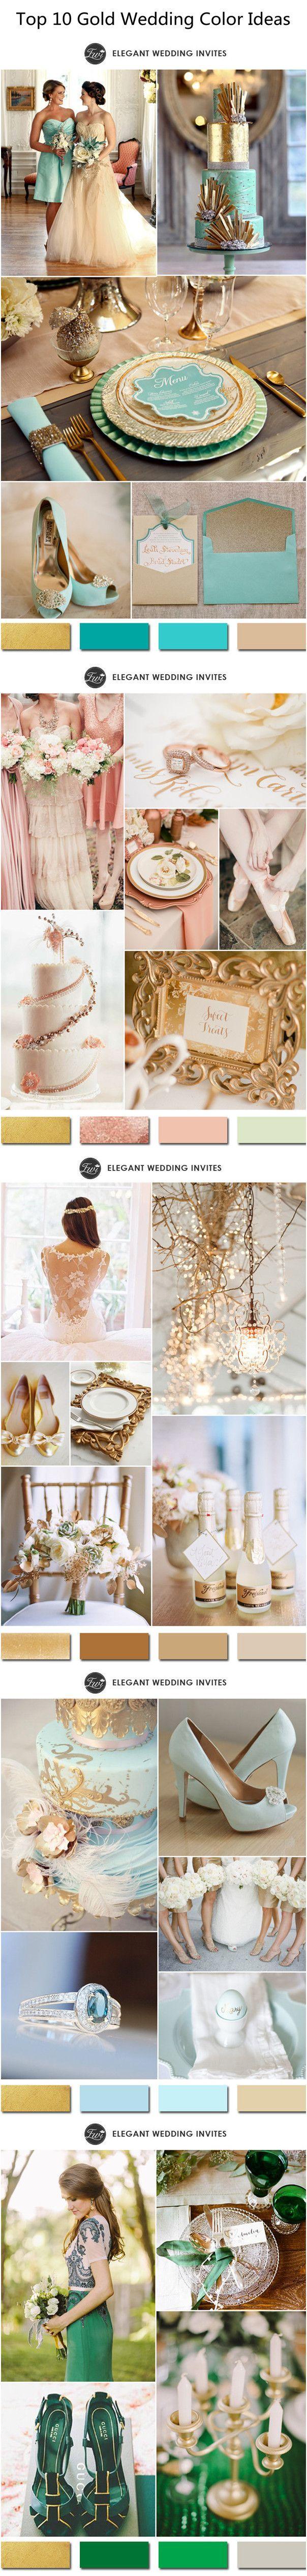 Mariage - 10 Hottest Gold Wedding Color Ideas-2016 Wedding Trends Part Two